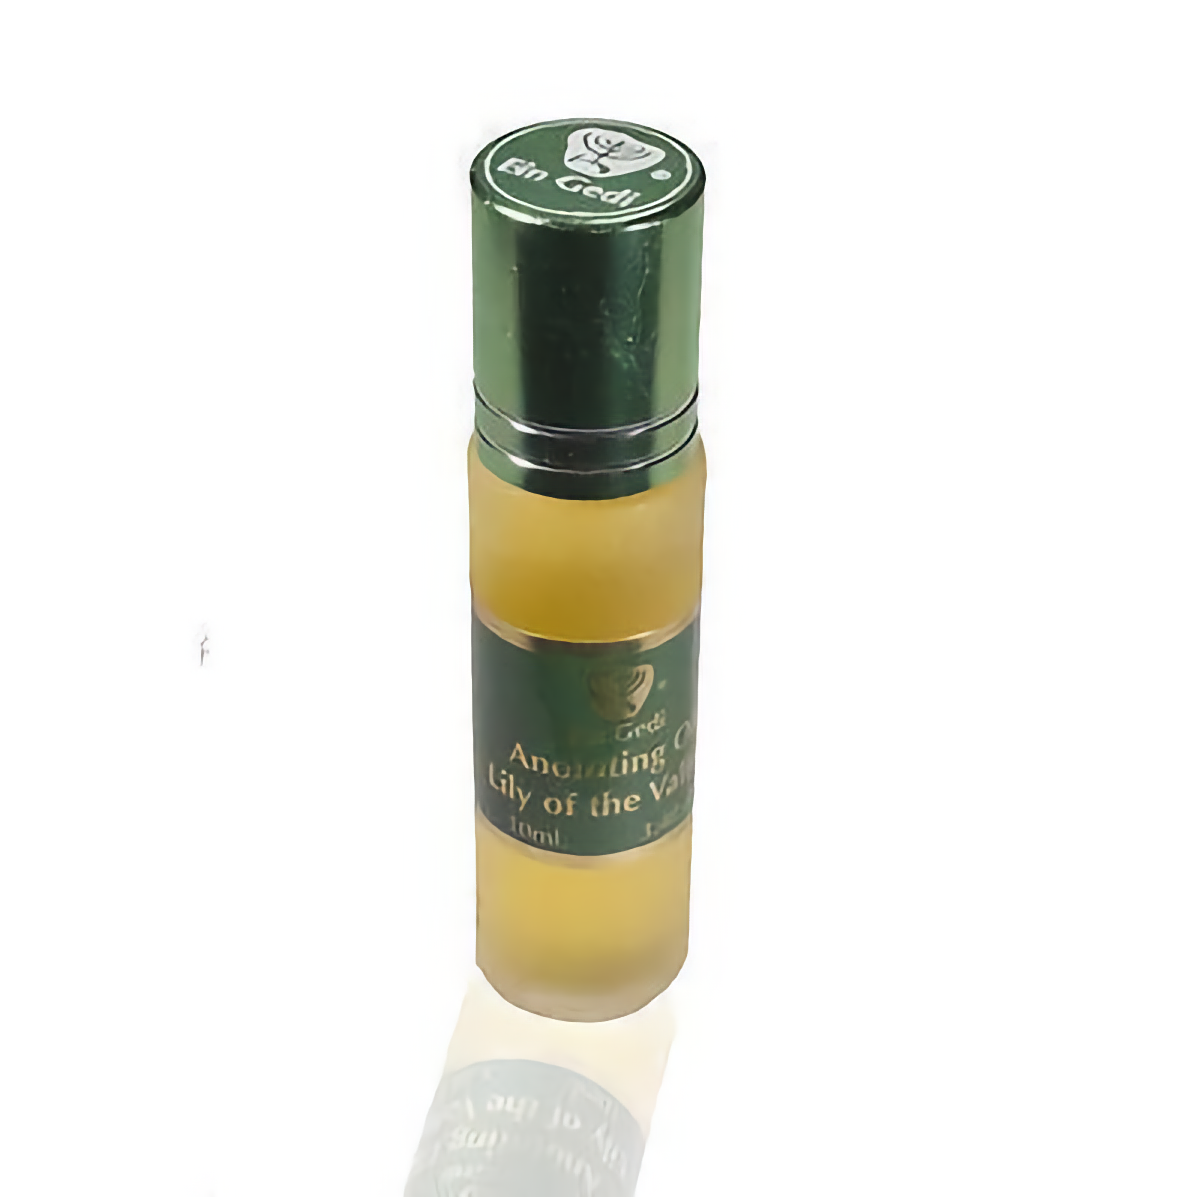 5 x Roll On Anointing Oil Lily Of The Valleys 10 ml - 0.34 oz Holyland Jerusalem